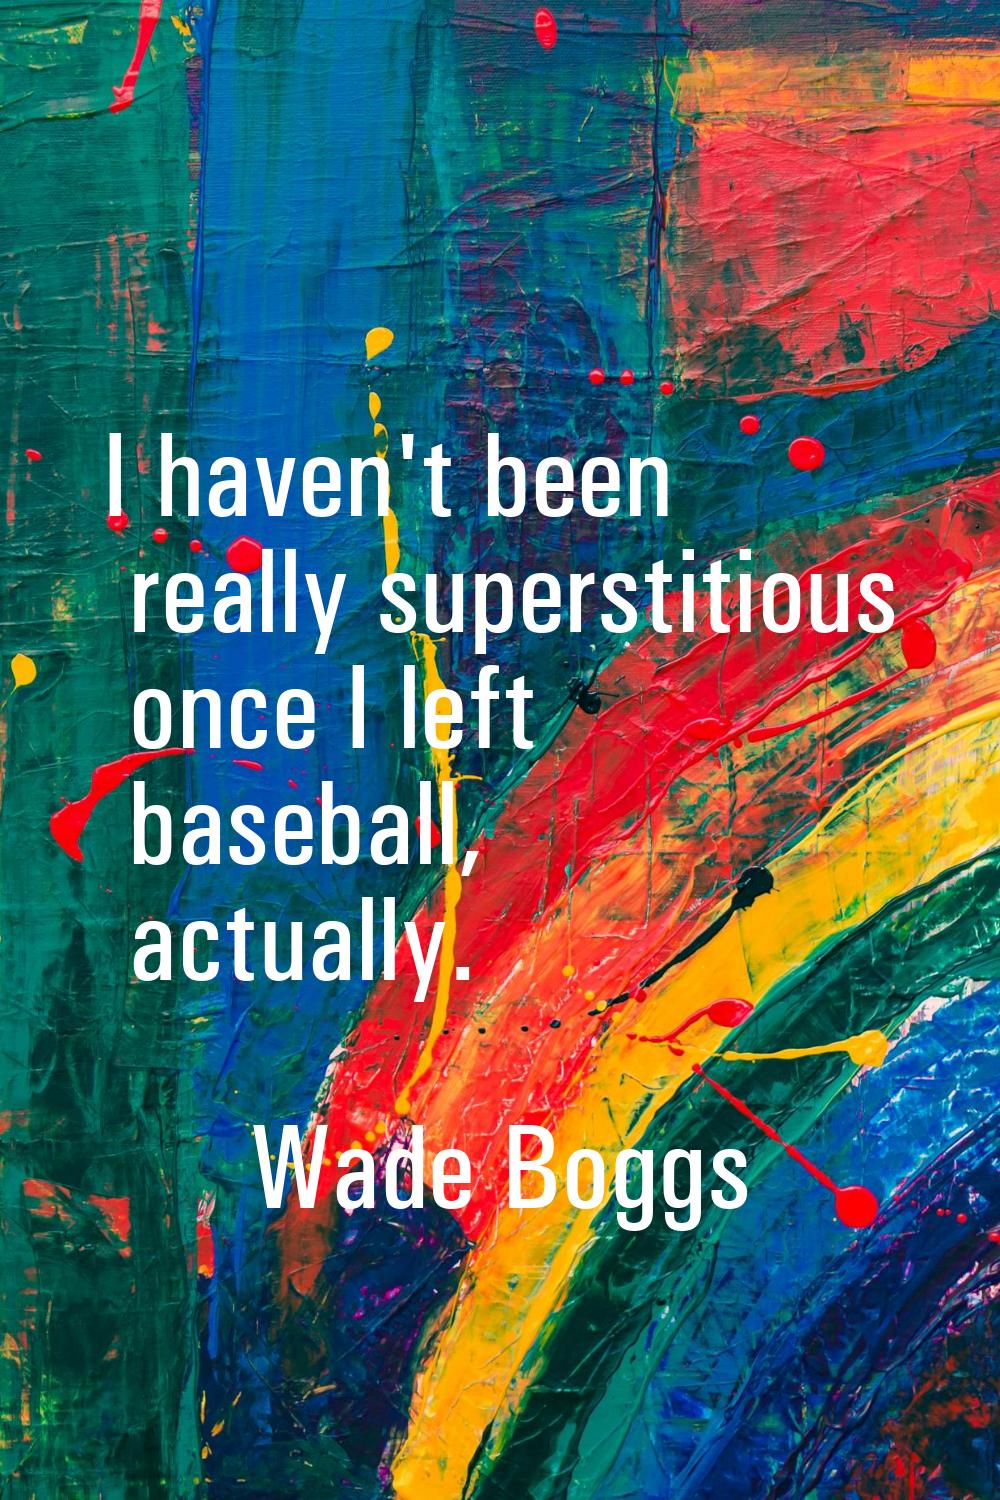 I haven't been really superstitious once I left baseball, actually.